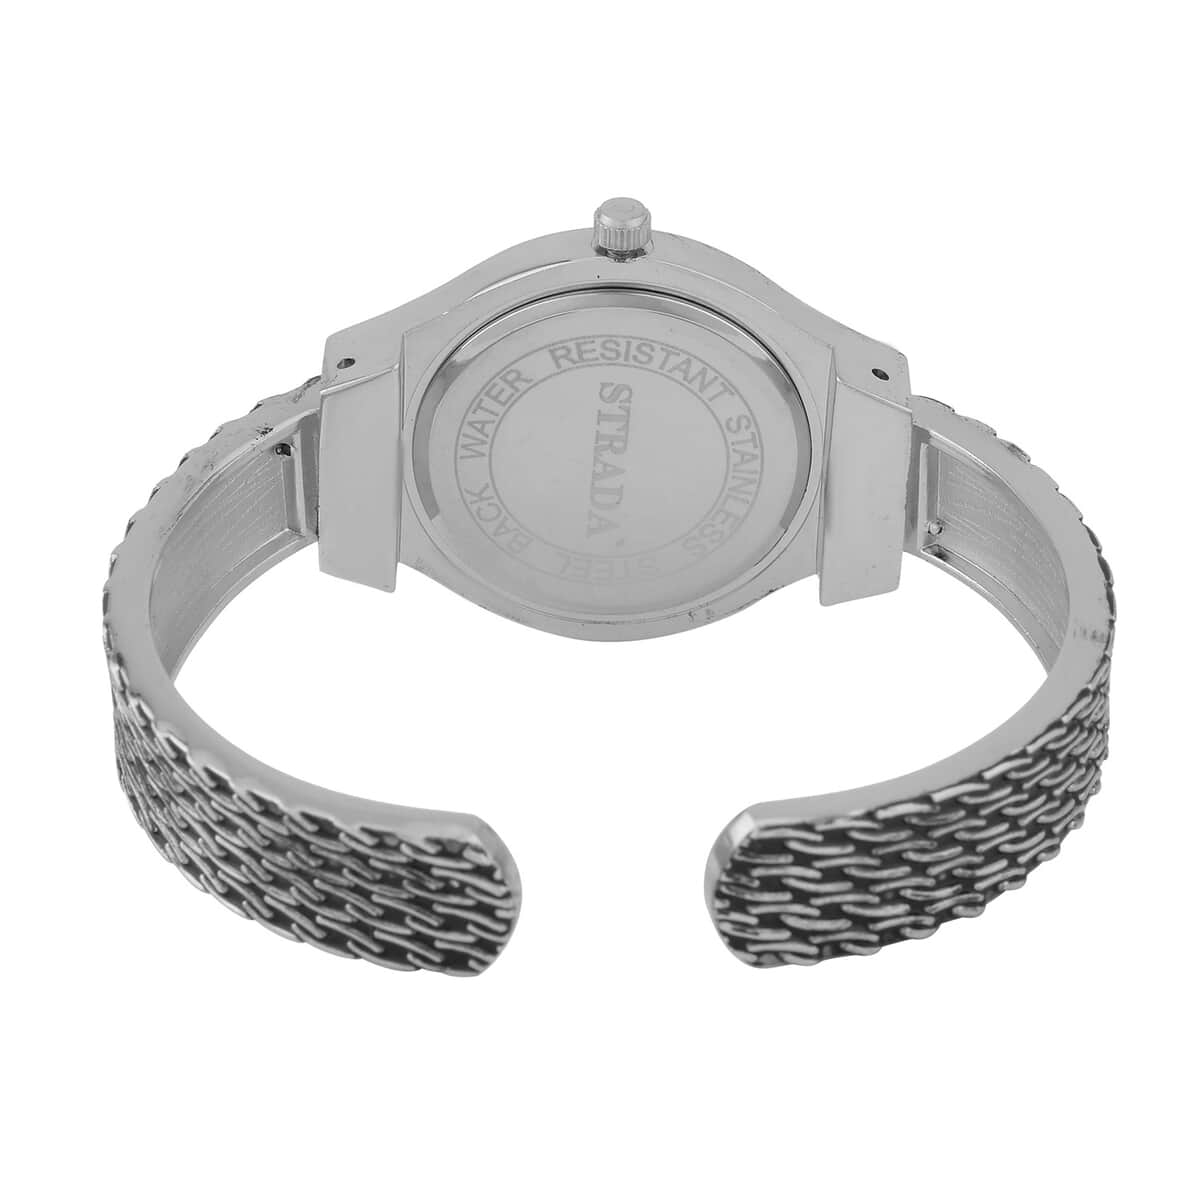 Strada Japanese Movement Cuff Watch in Black Oxidized Silvertone with Stainless Steel Back (26.67-33.27mm) image number 5